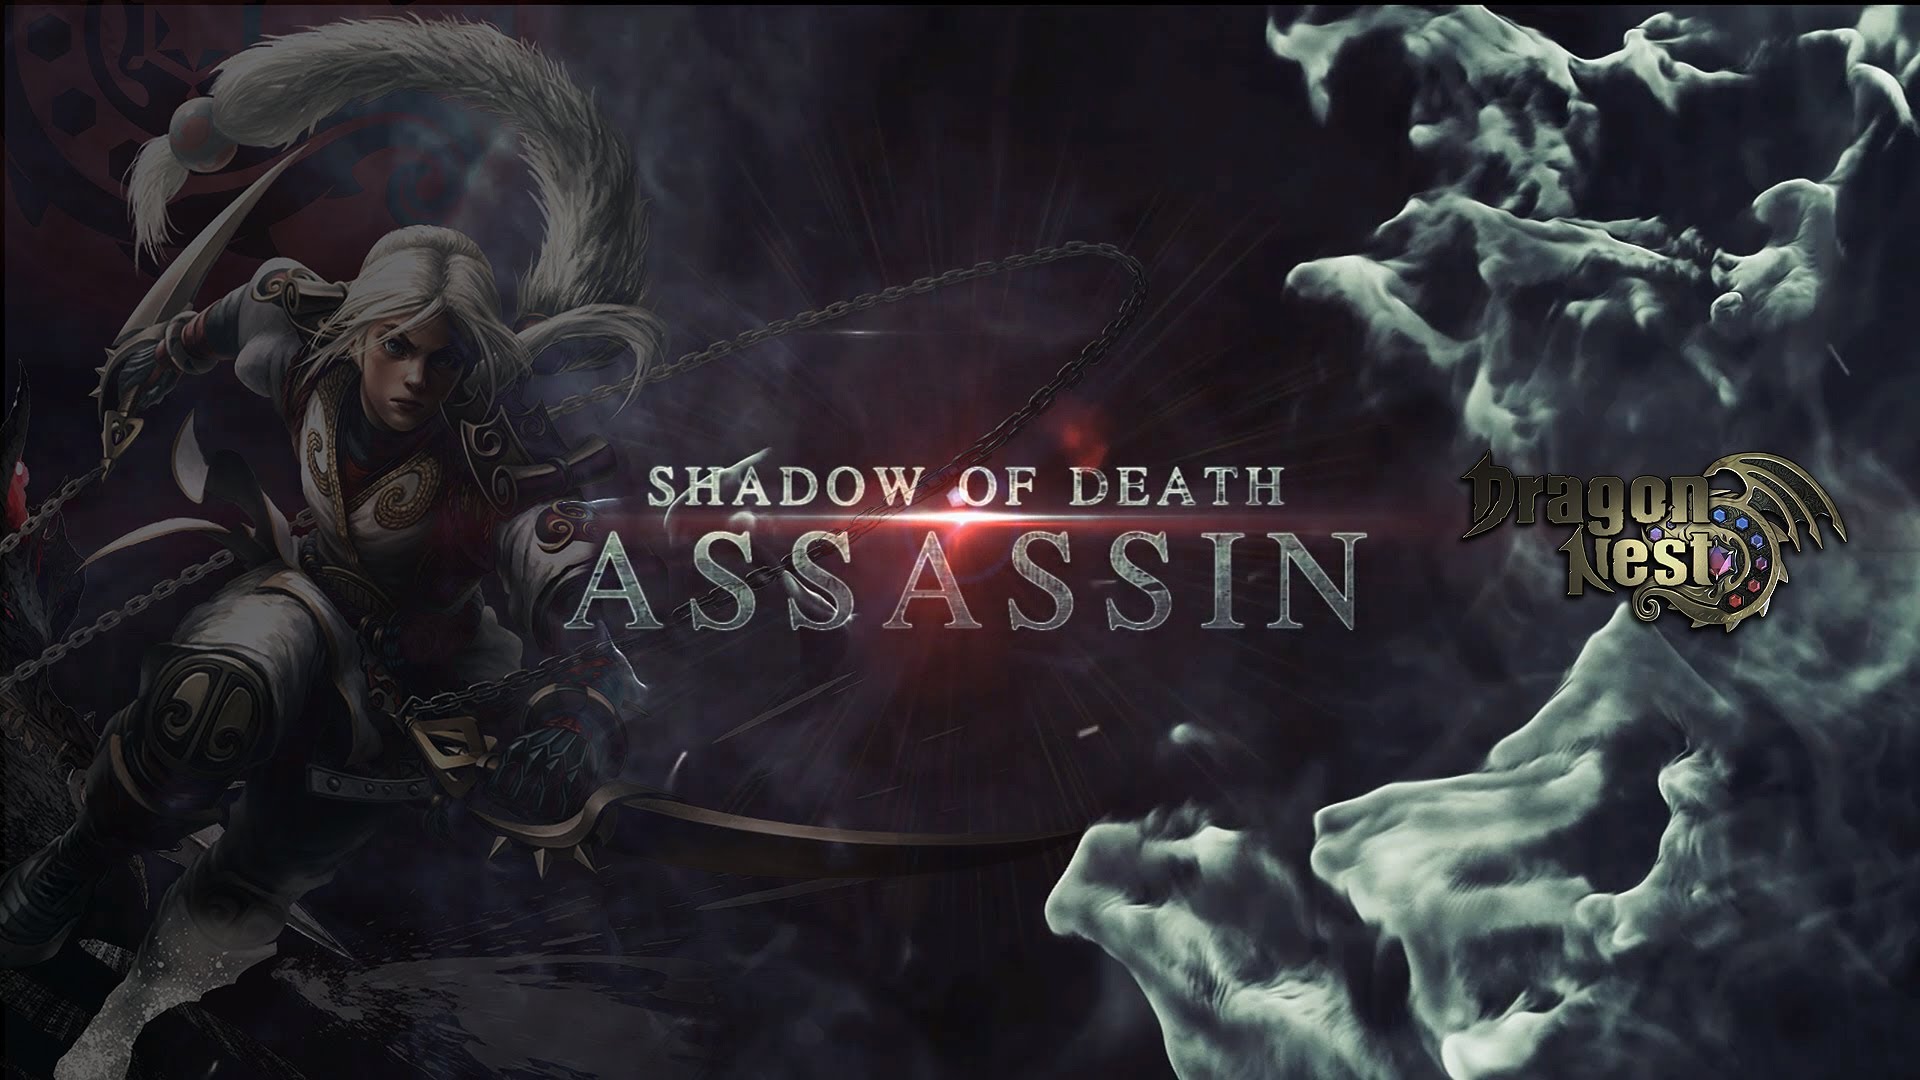 Dragon Nest SEA: Shadow of Death, Official Assassin Trailer - YouTube